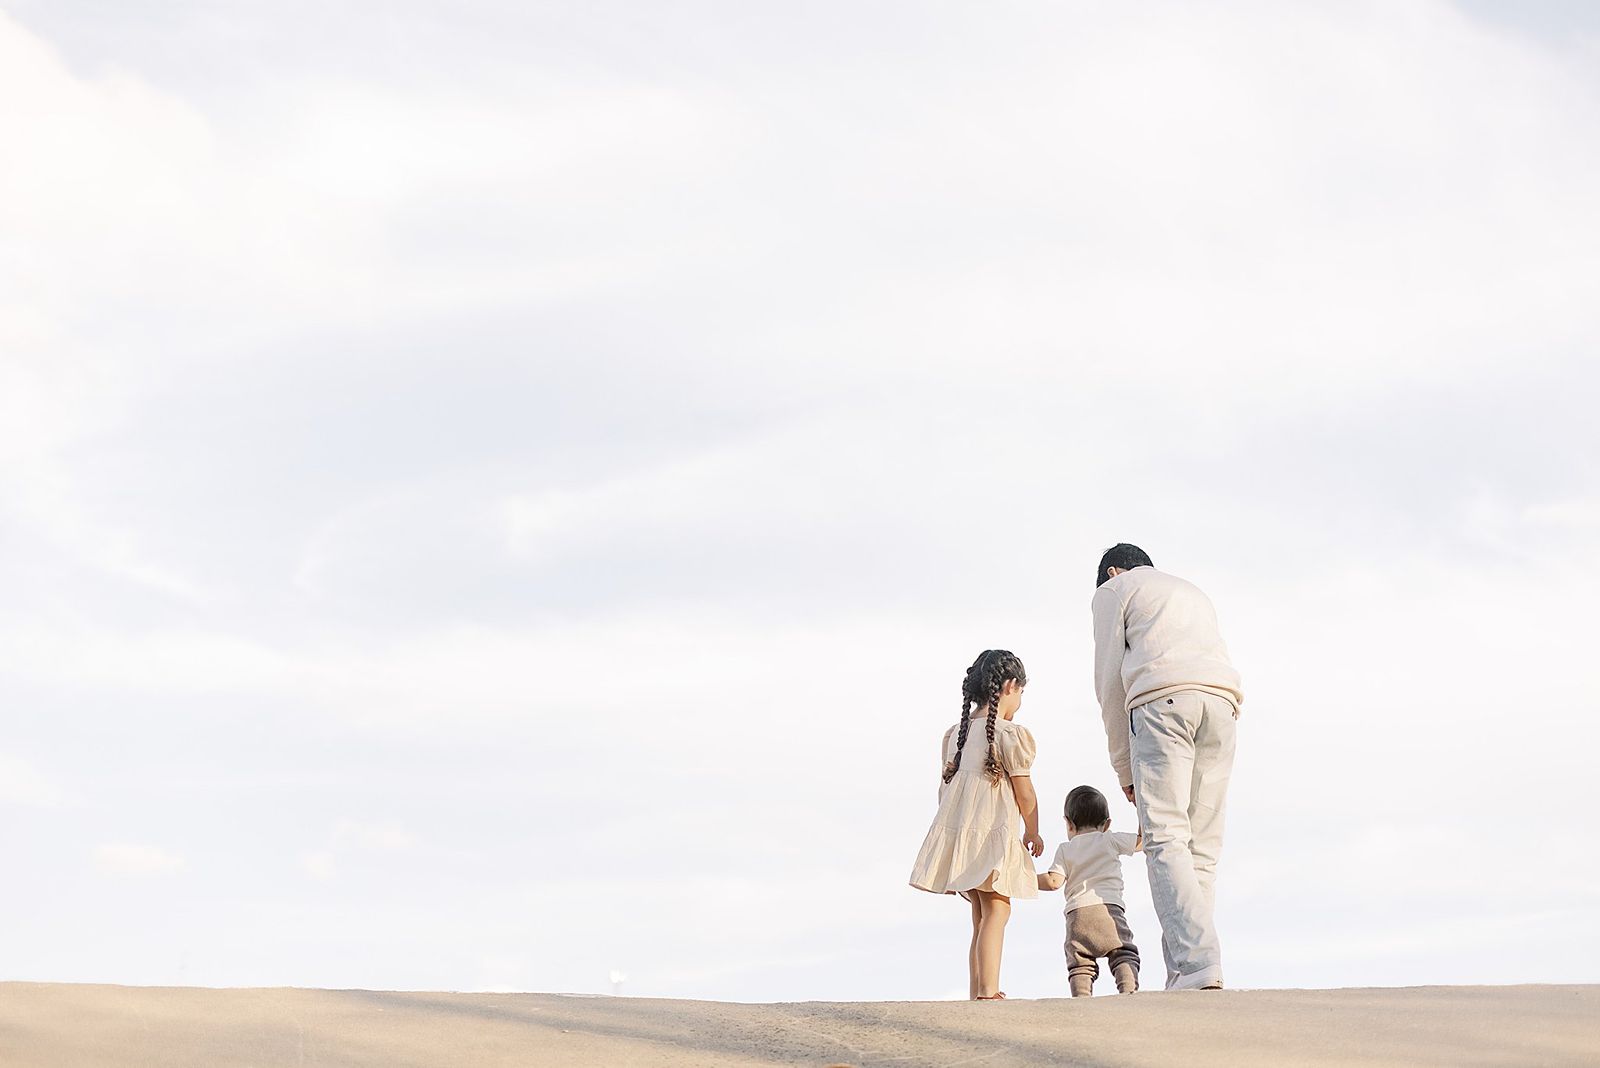 Dad stands with daughter and young toddler, facing away from camera